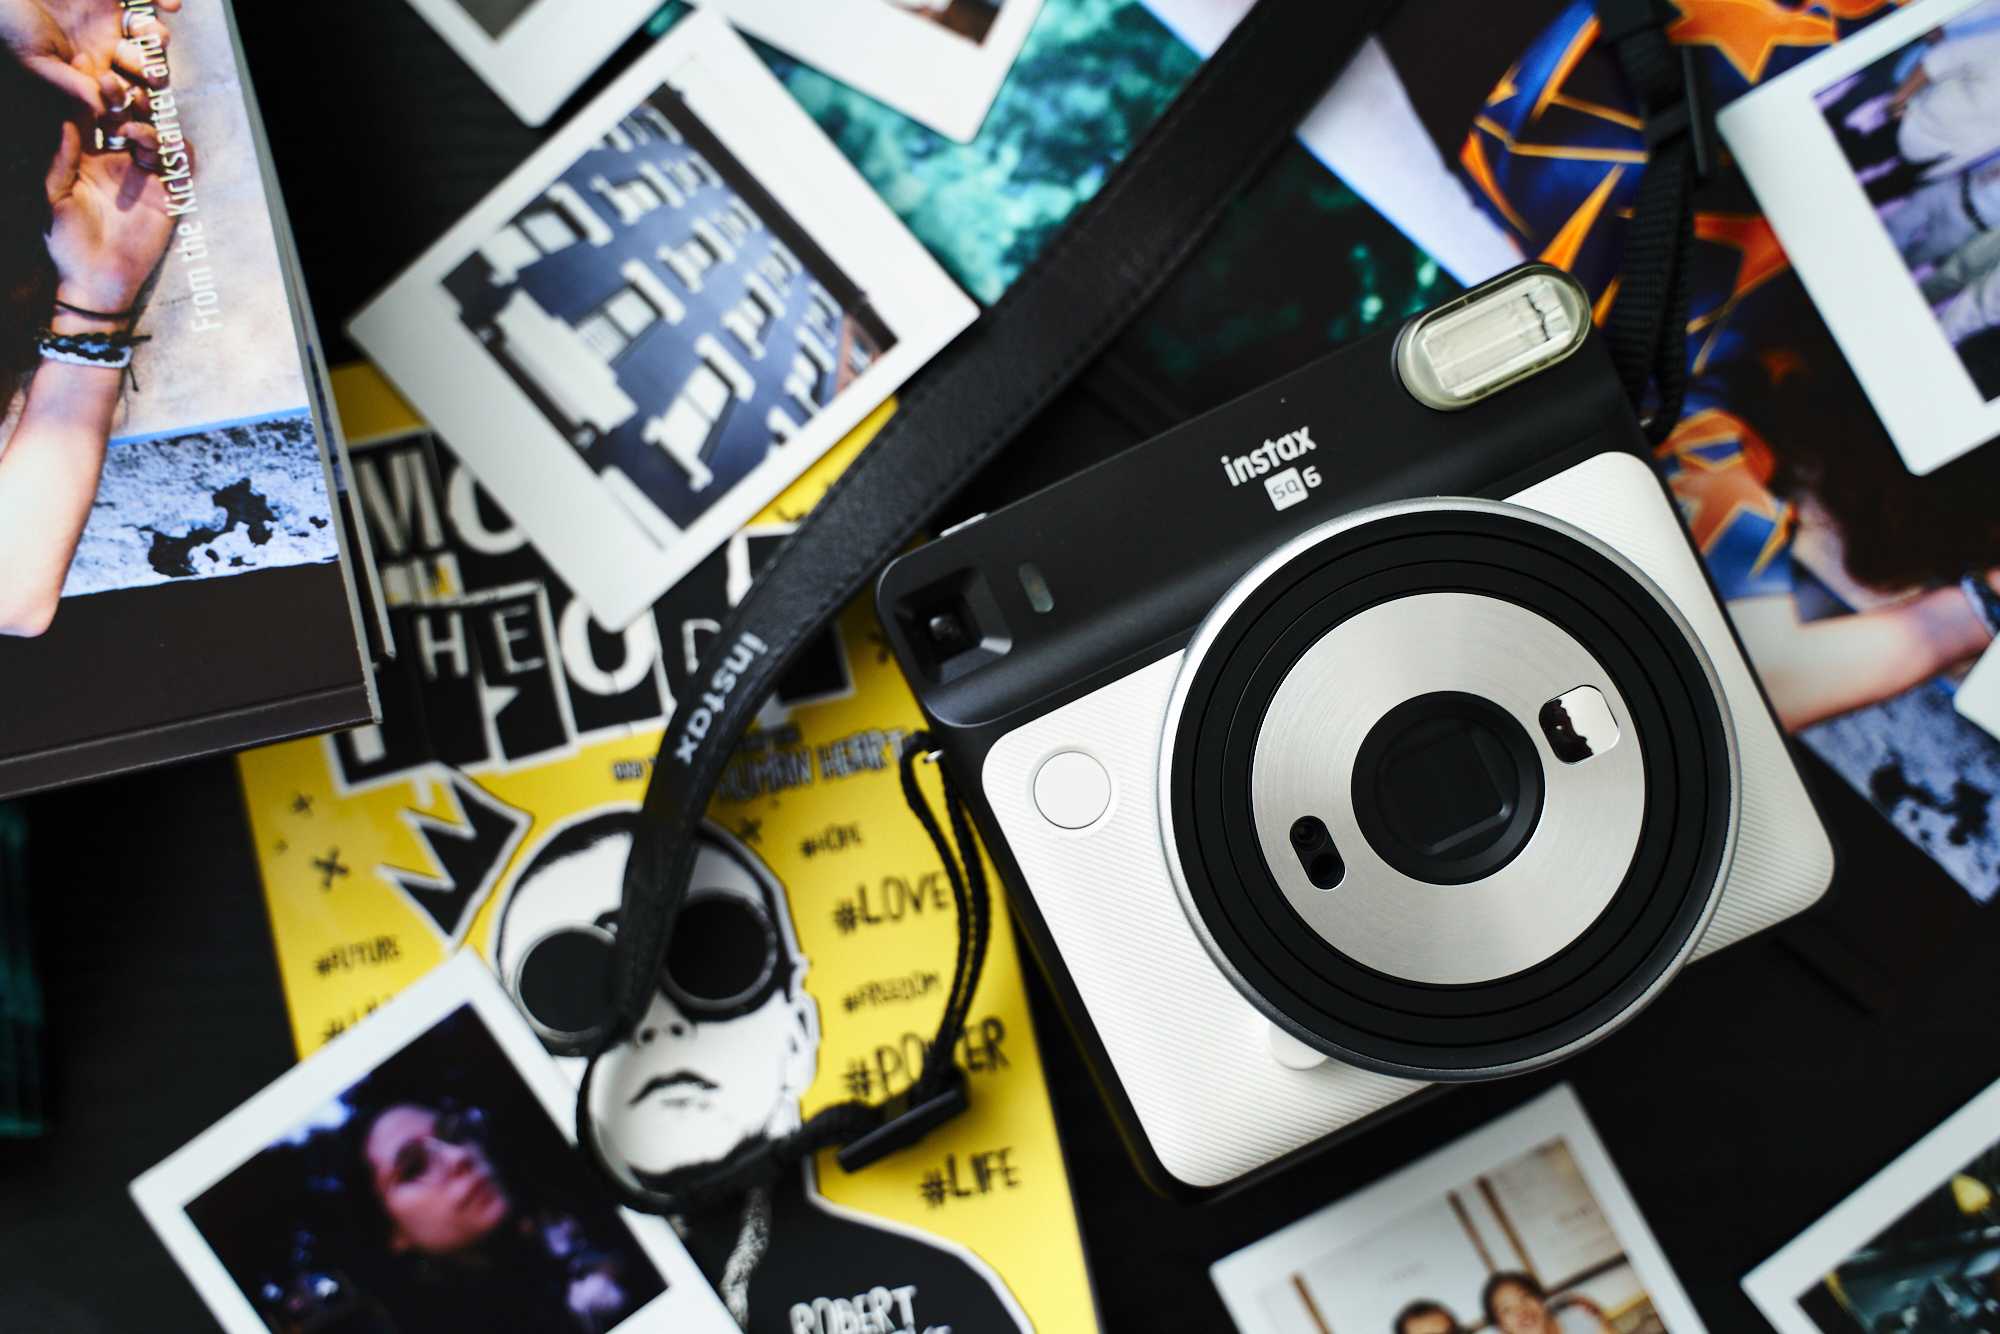 Expert review of the Fujifilm Instax SQ6 - Coolblue - anything for a smile